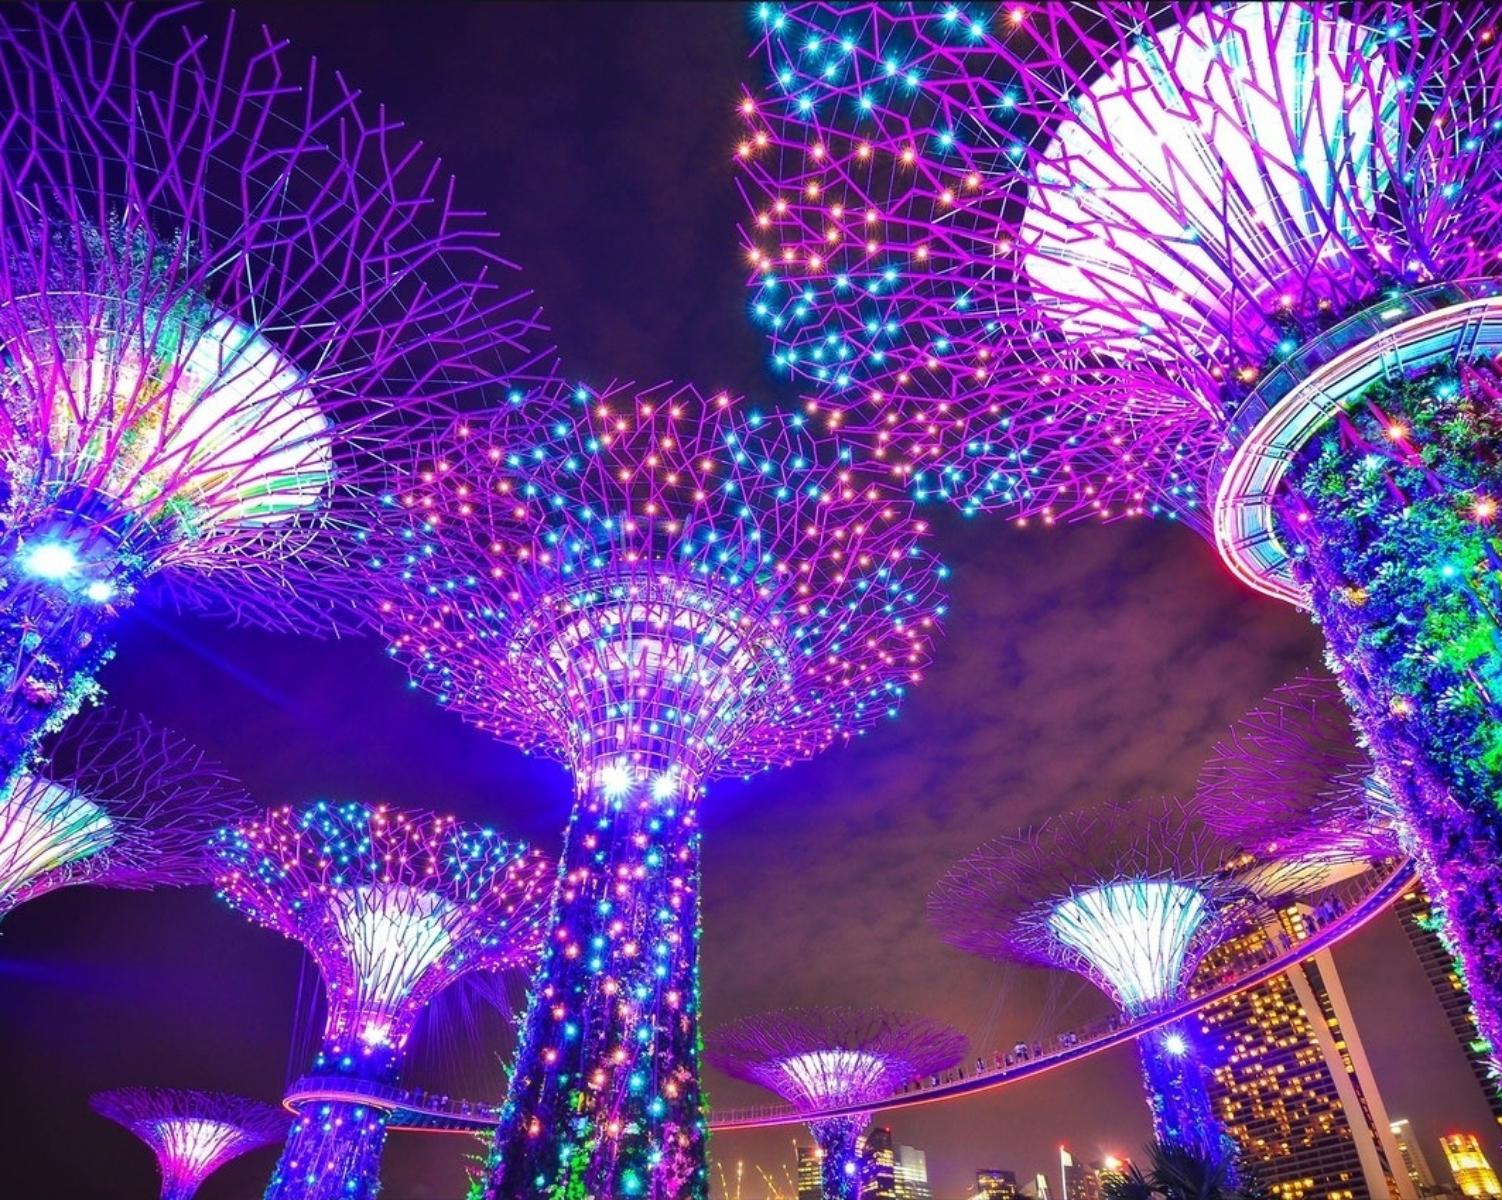 10. Gardens by the Bay – Singapore